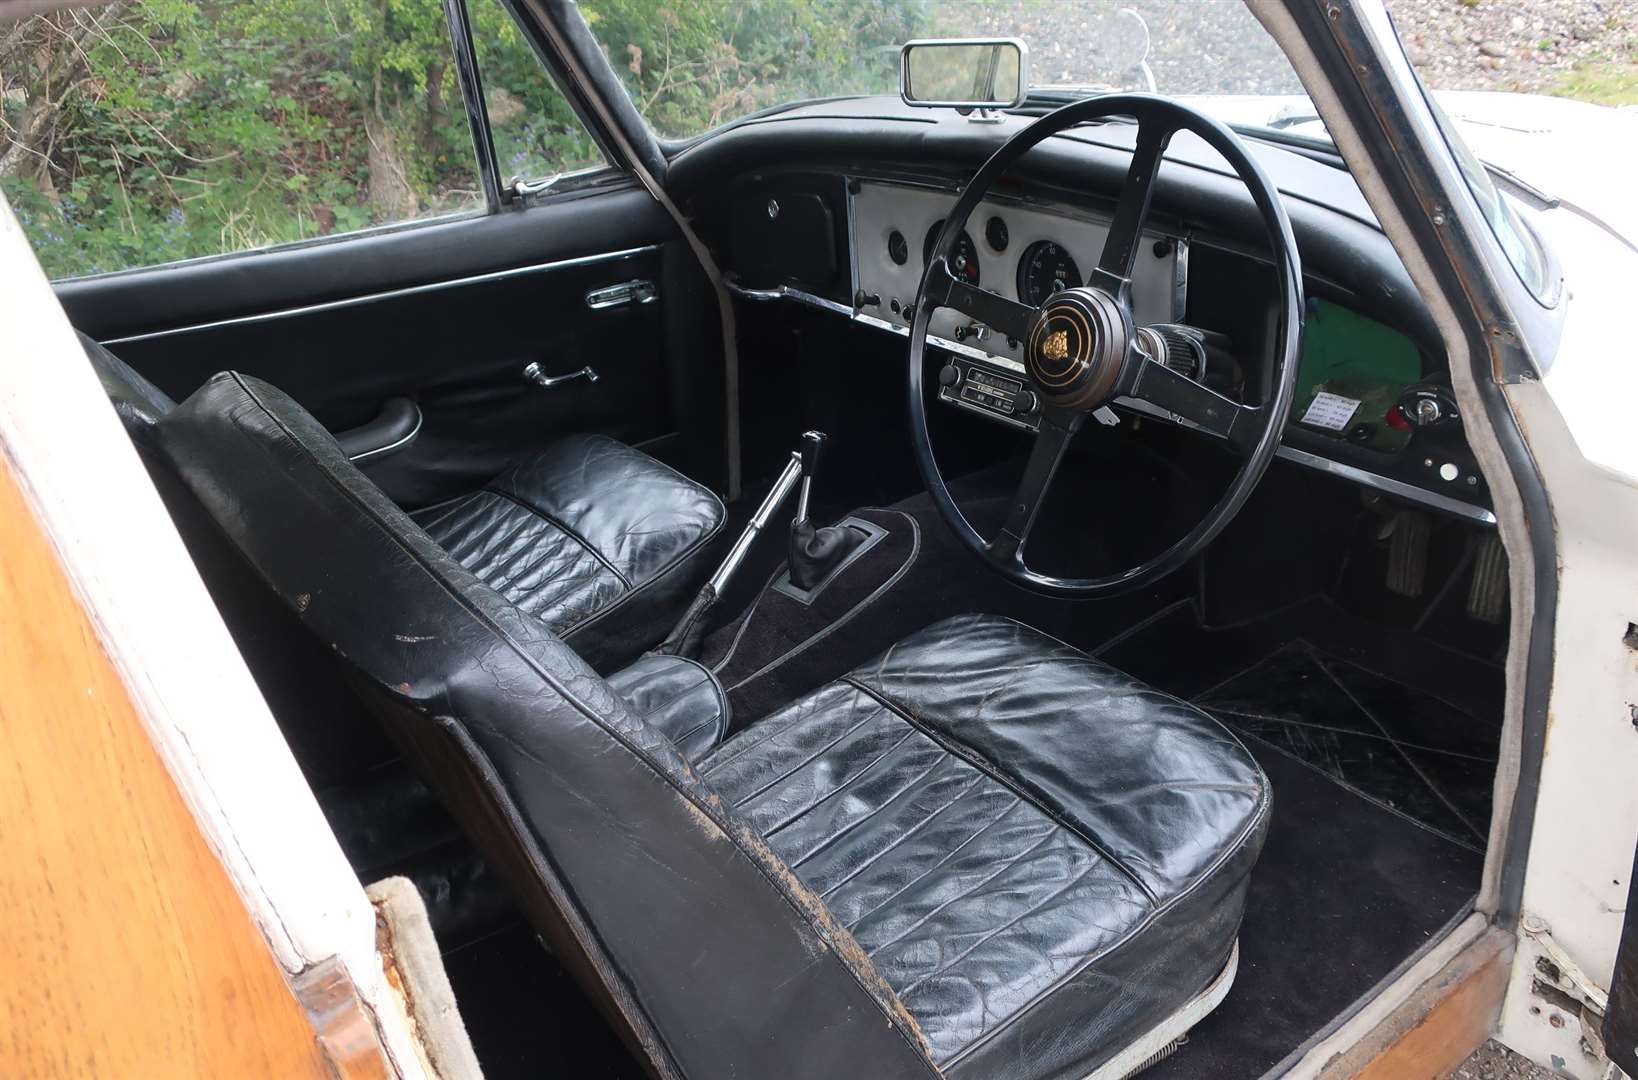 A look inside this one-of-a-kind car